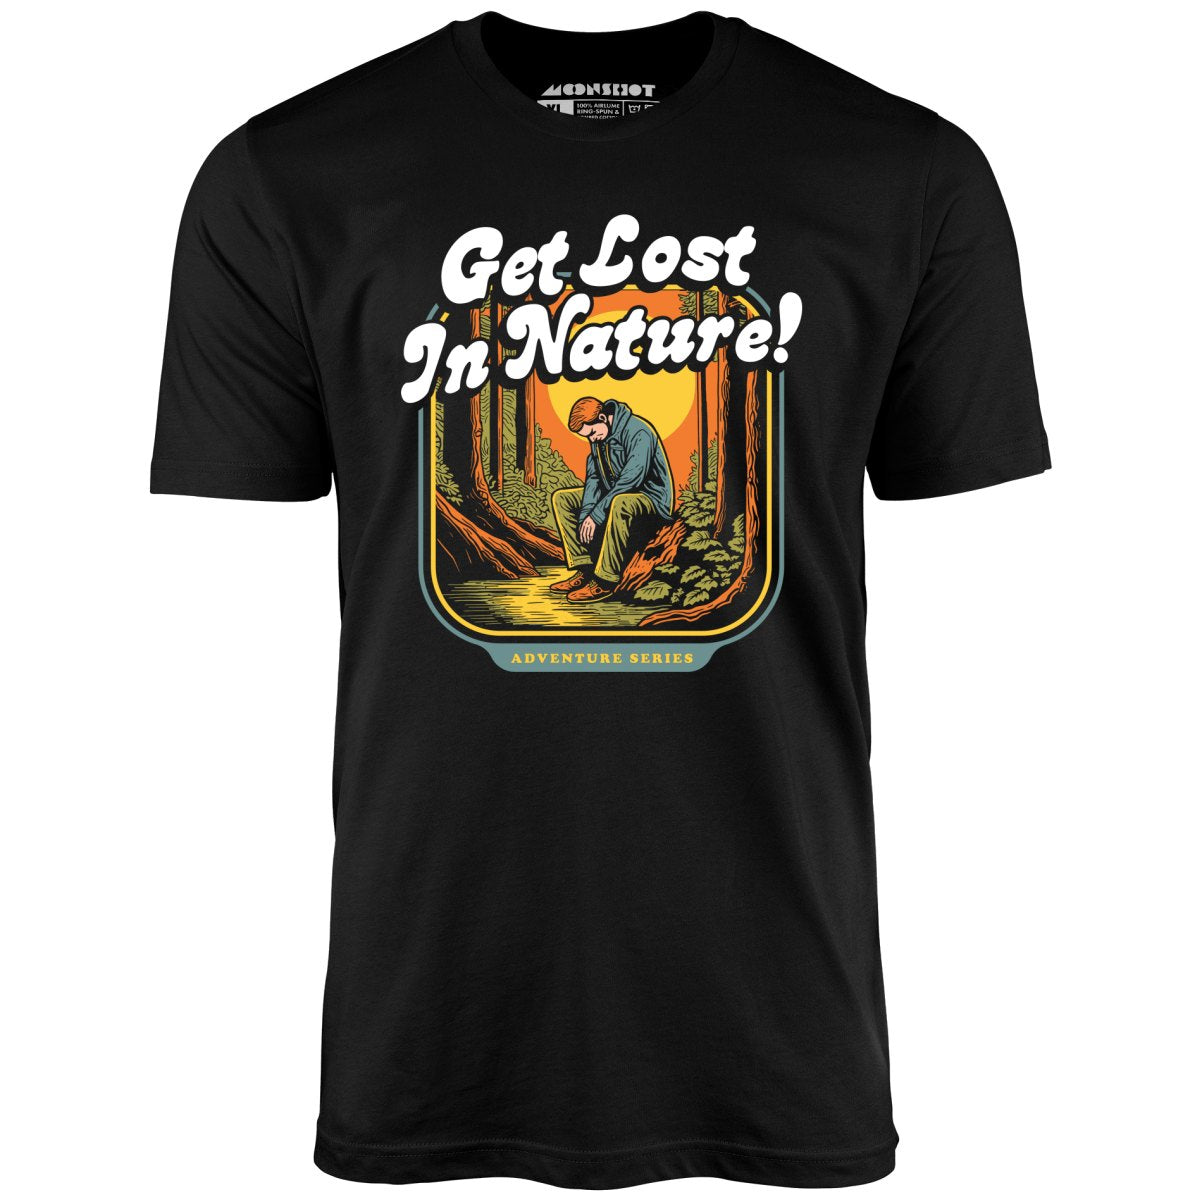 Get Lost in Nature - Unisex T-Shirt